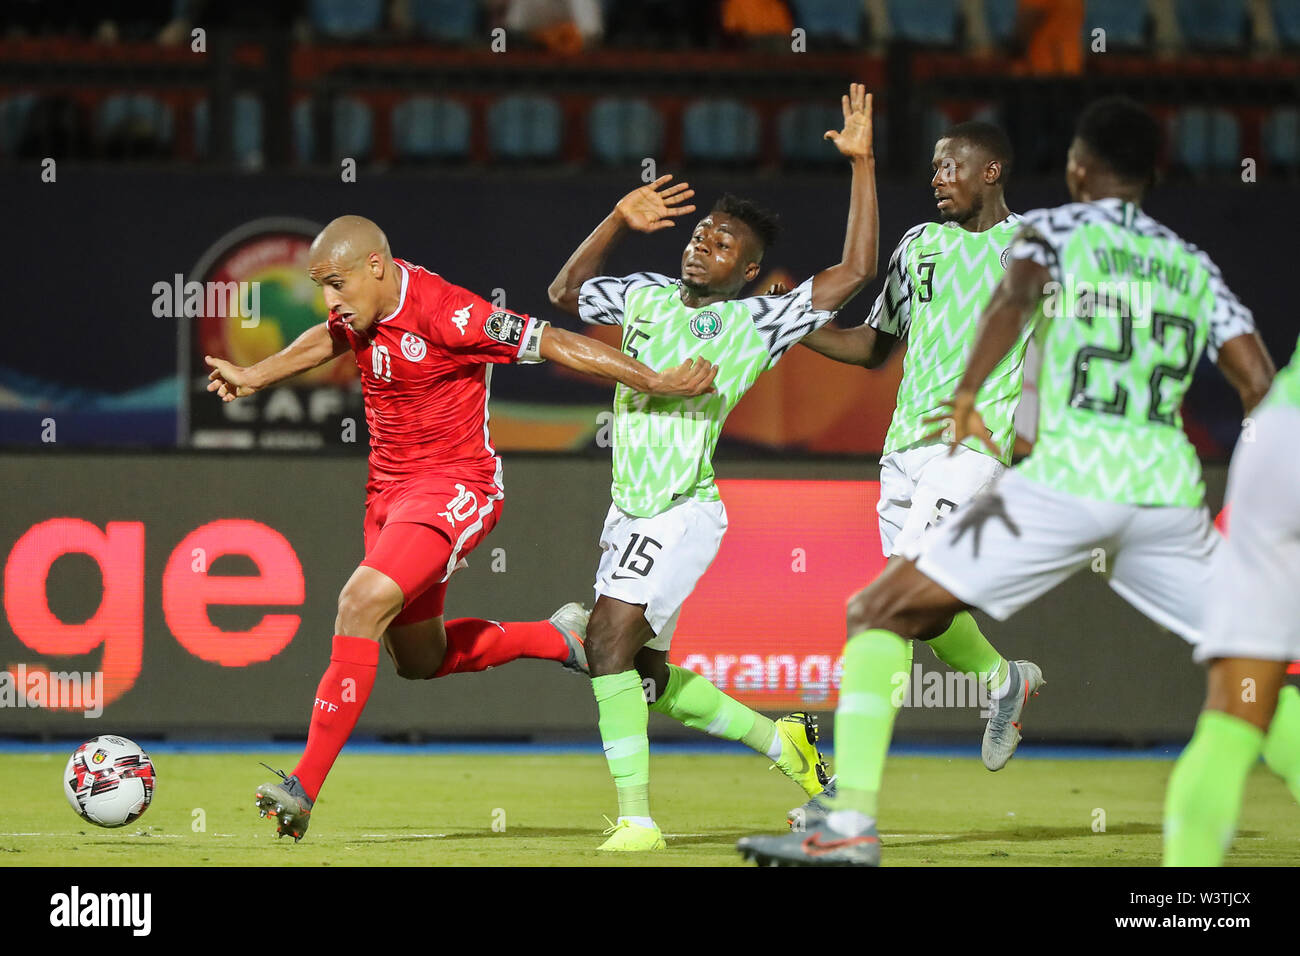 Cairo, Egypt. 17th July, 2019. Tunisia's Wahib Khazri vies for the ball with Nigeria's Moses Simon, Nigeria's Jamilu Collins, and Nigeria's Kenneth Omeruo during the 2019 Africa Cup of Nations third place final soccer match between Tunisia and Nigeria at the Al-Salam Stadium. Credit: Omar Zoheiry/dpa/Alamy Live News Stock Photo